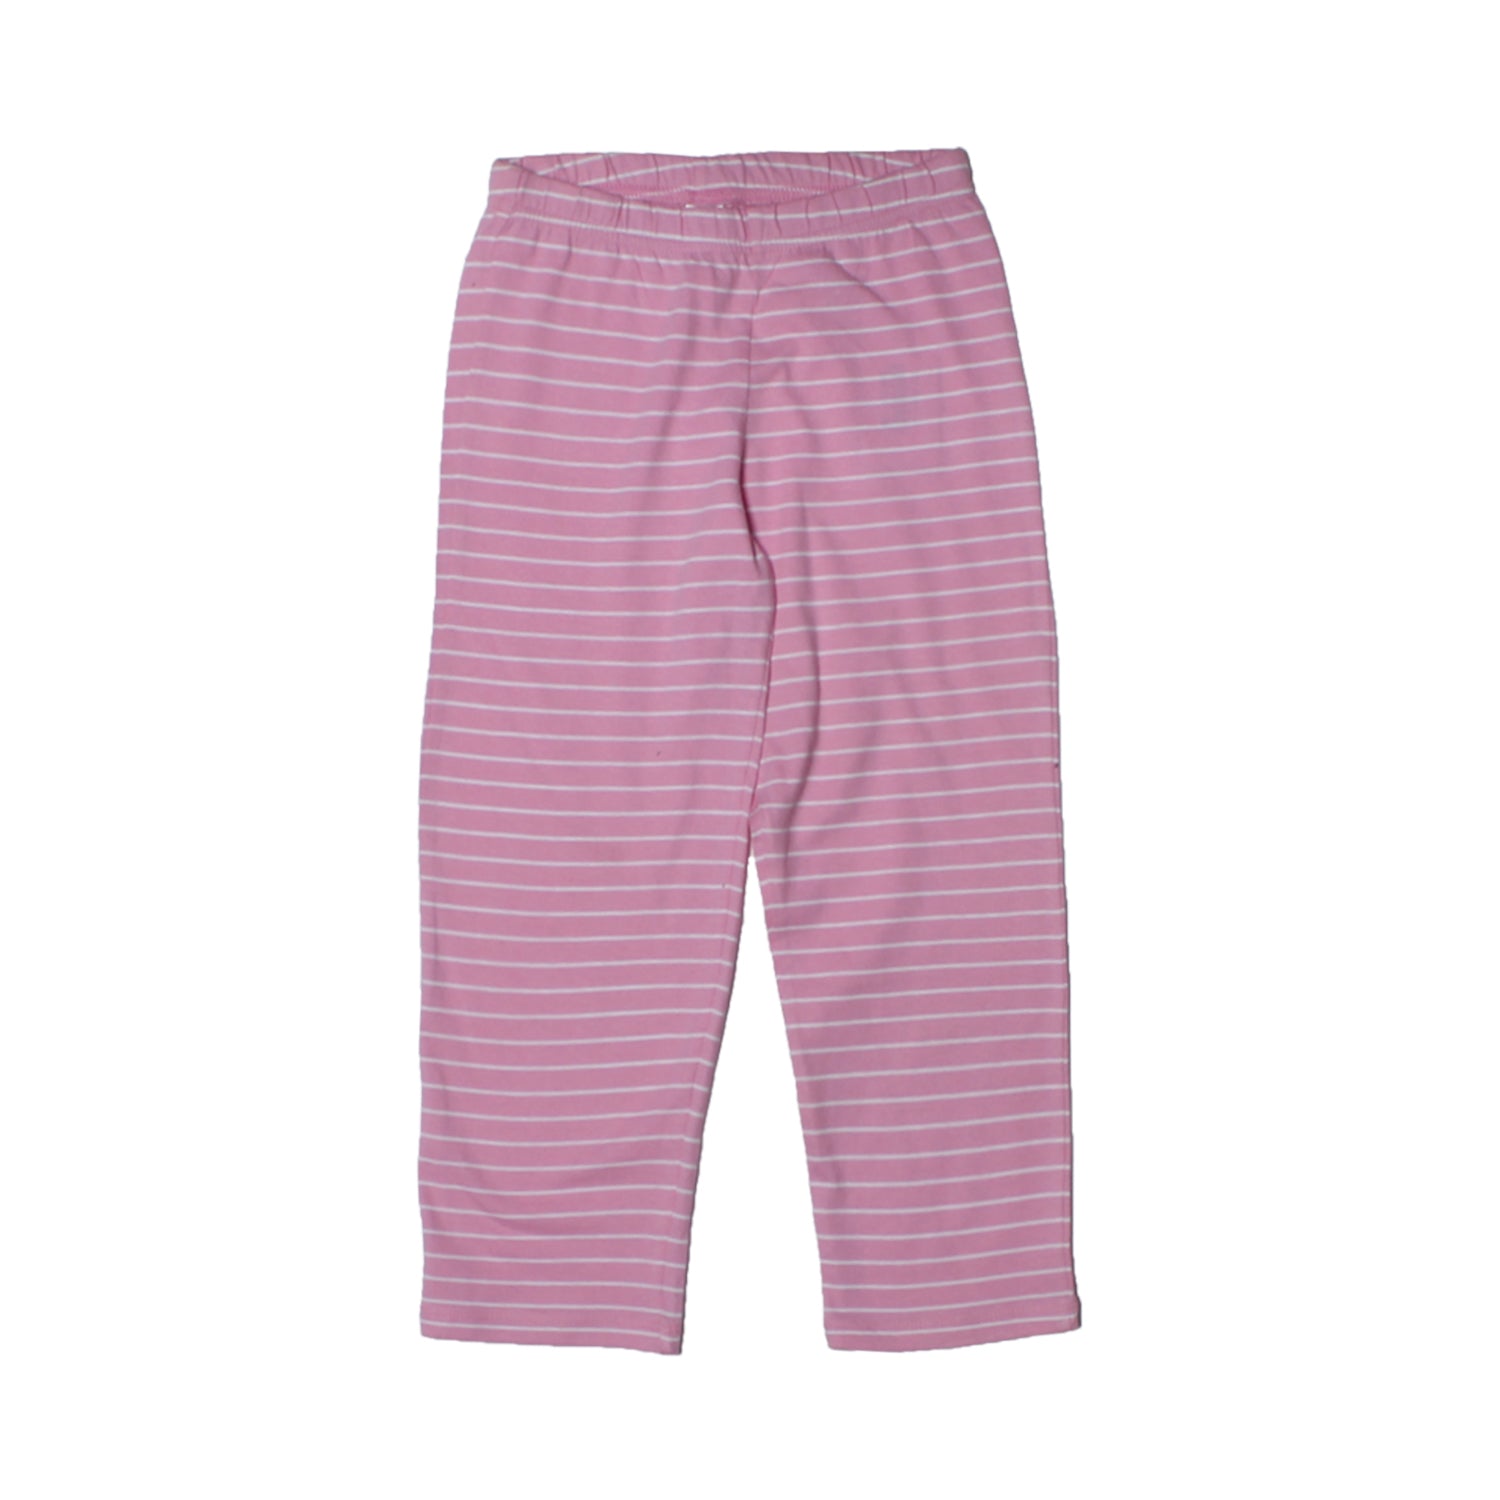 NEW BABY PINK WITH WHITE STRIPES PAJAMA FOR GIRLS